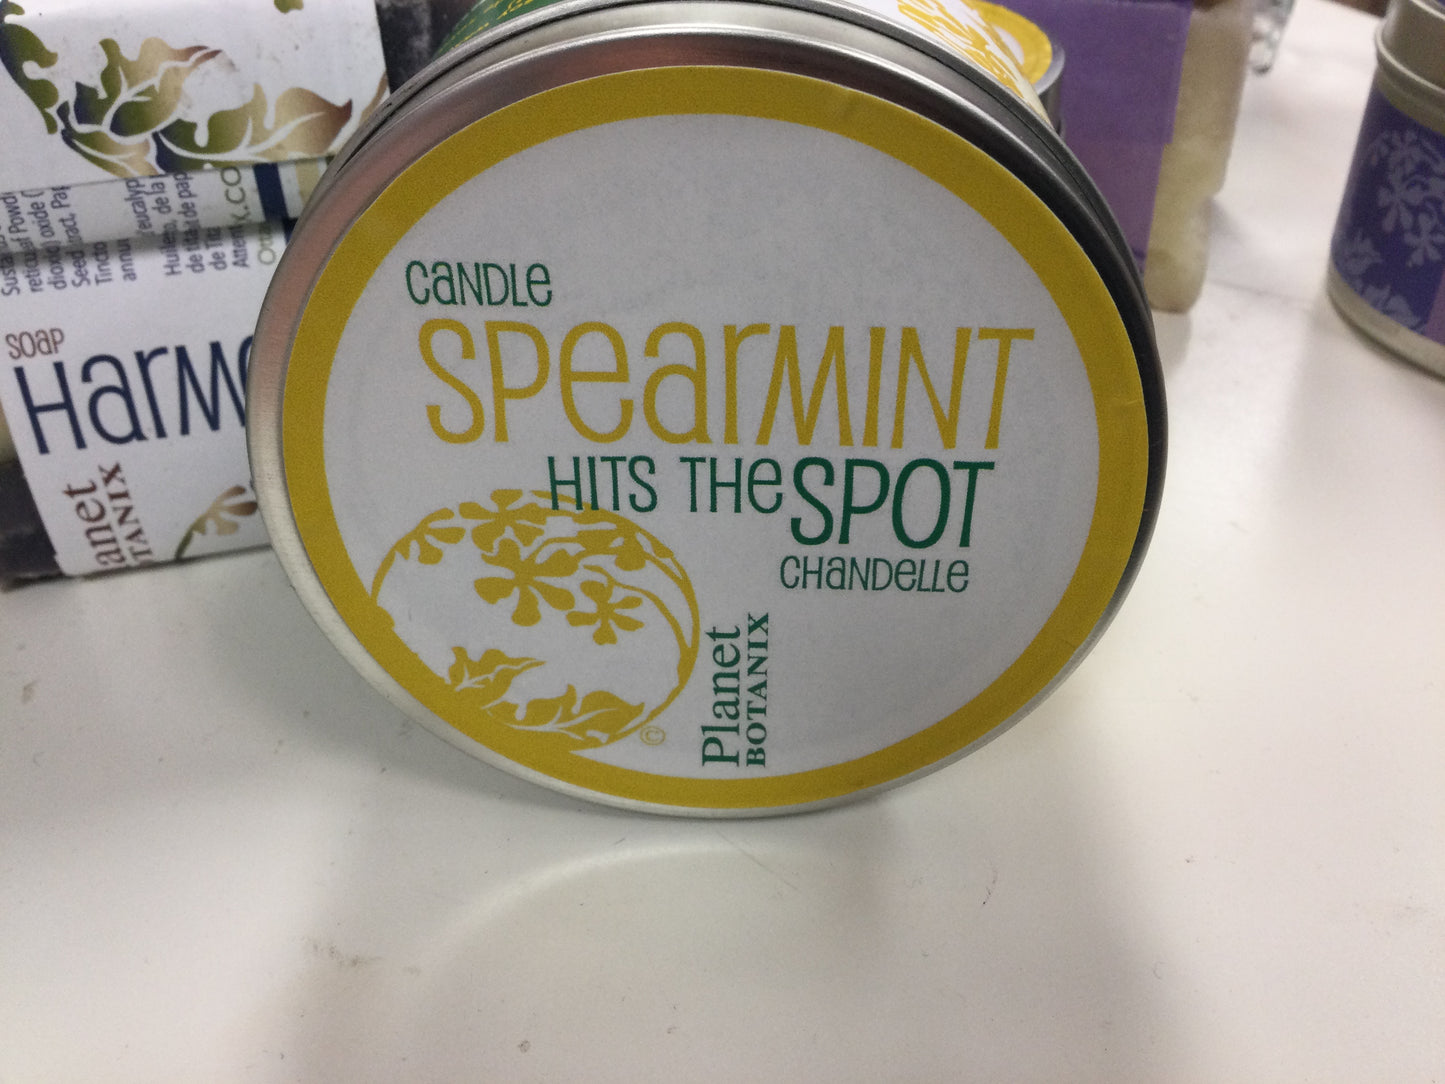 Spearmint Hits the Spot Candle